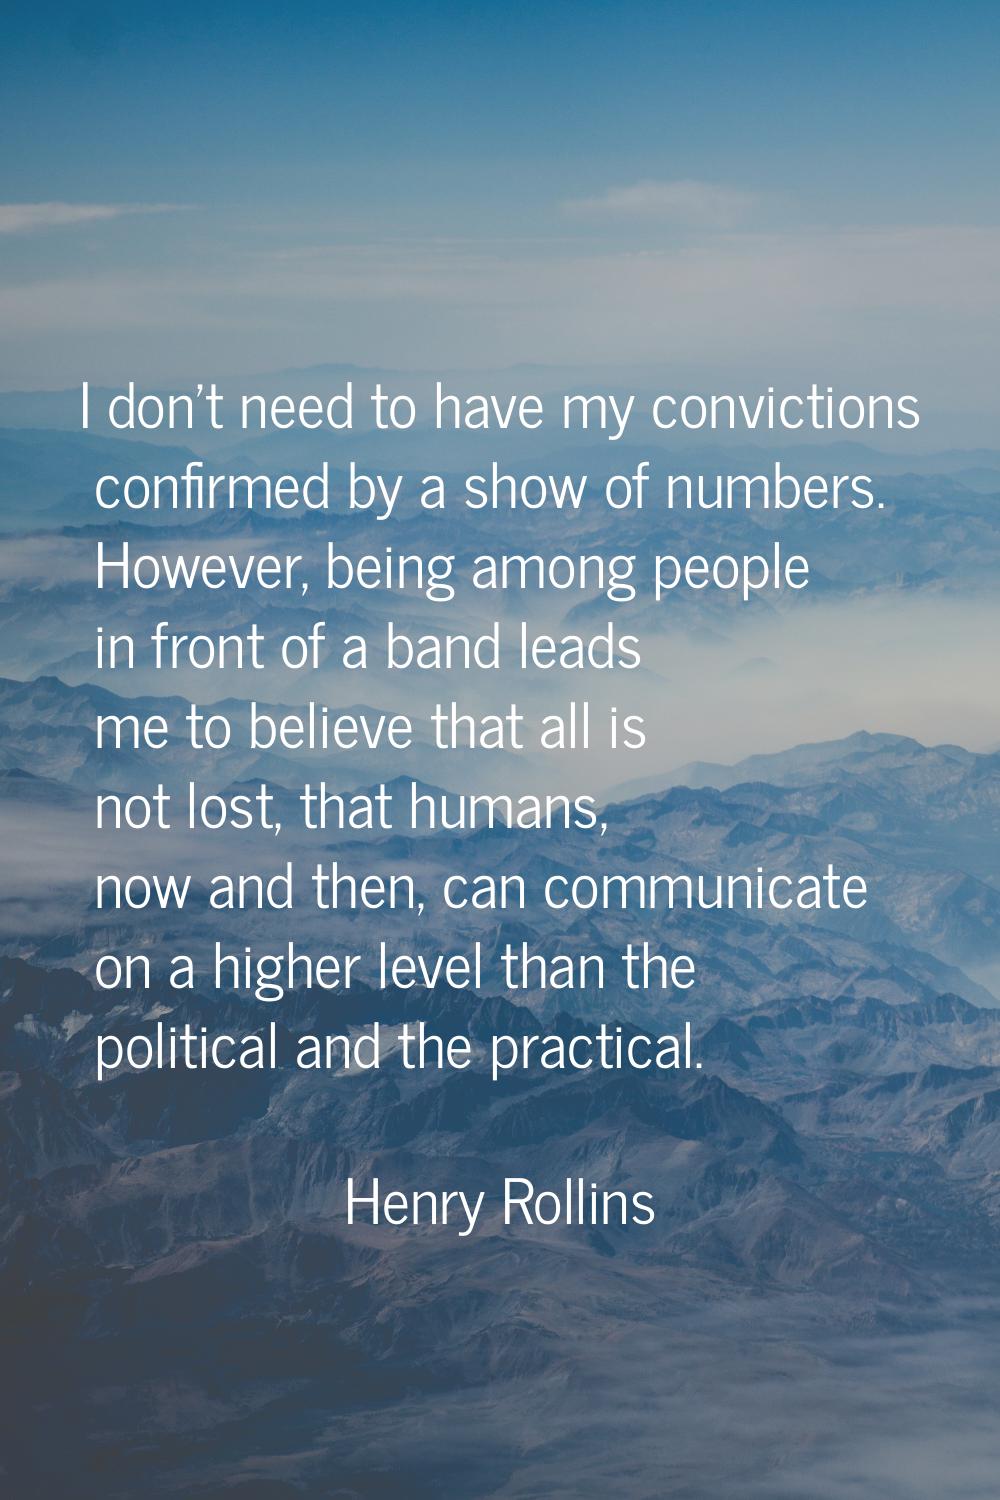 I don't need to have my convictions confirmed by a show of numbers. However, being among people in 